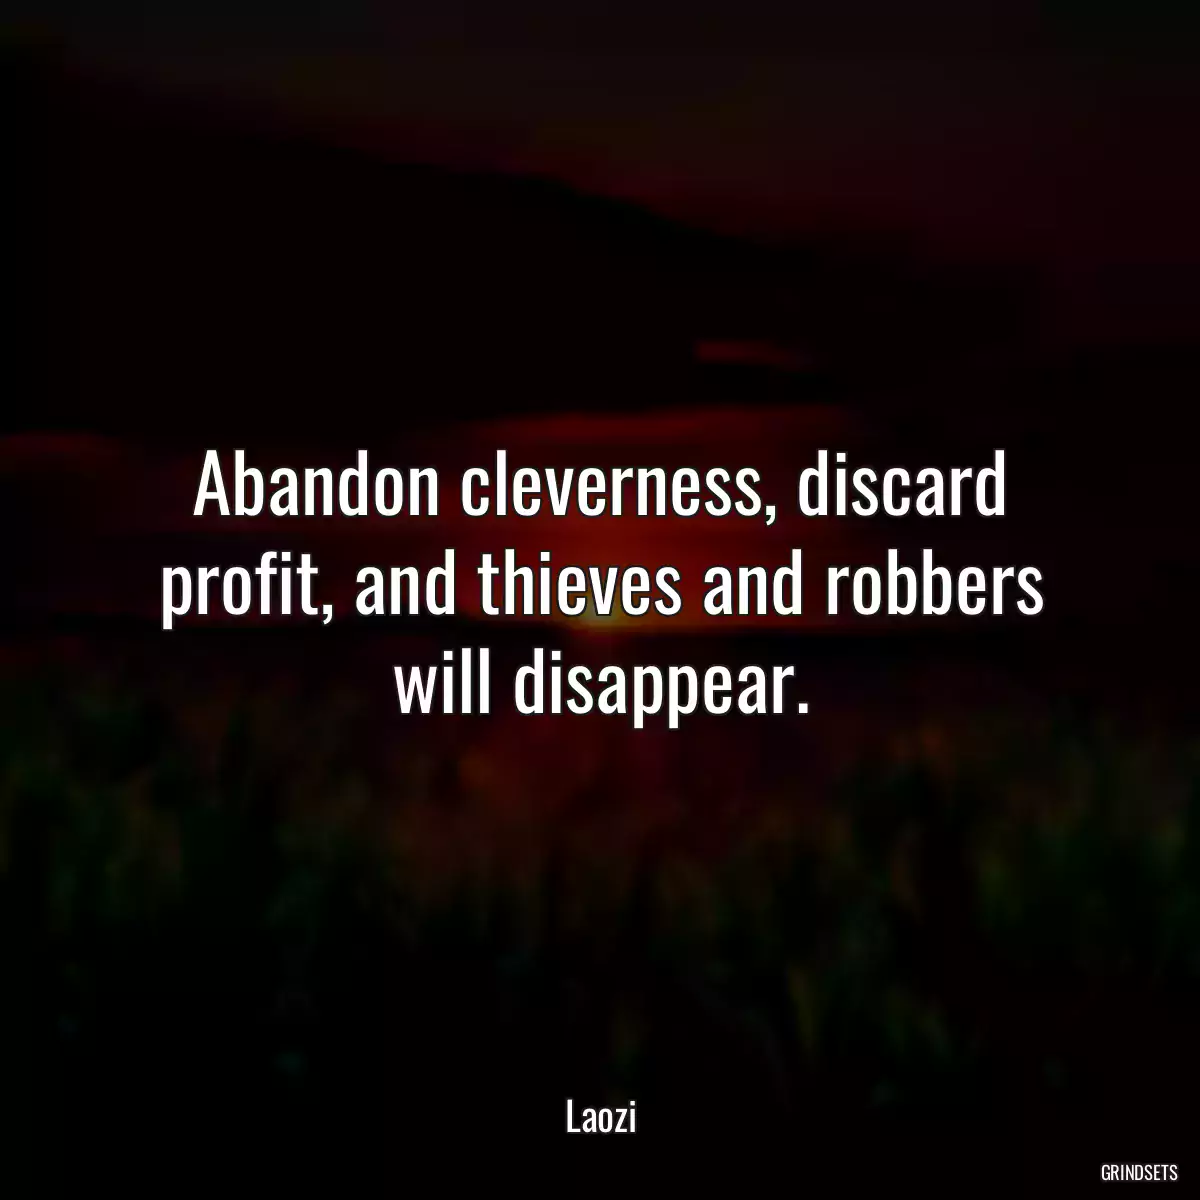 Abandon cleverness, discard profit, and thieves and robbers will disappear.